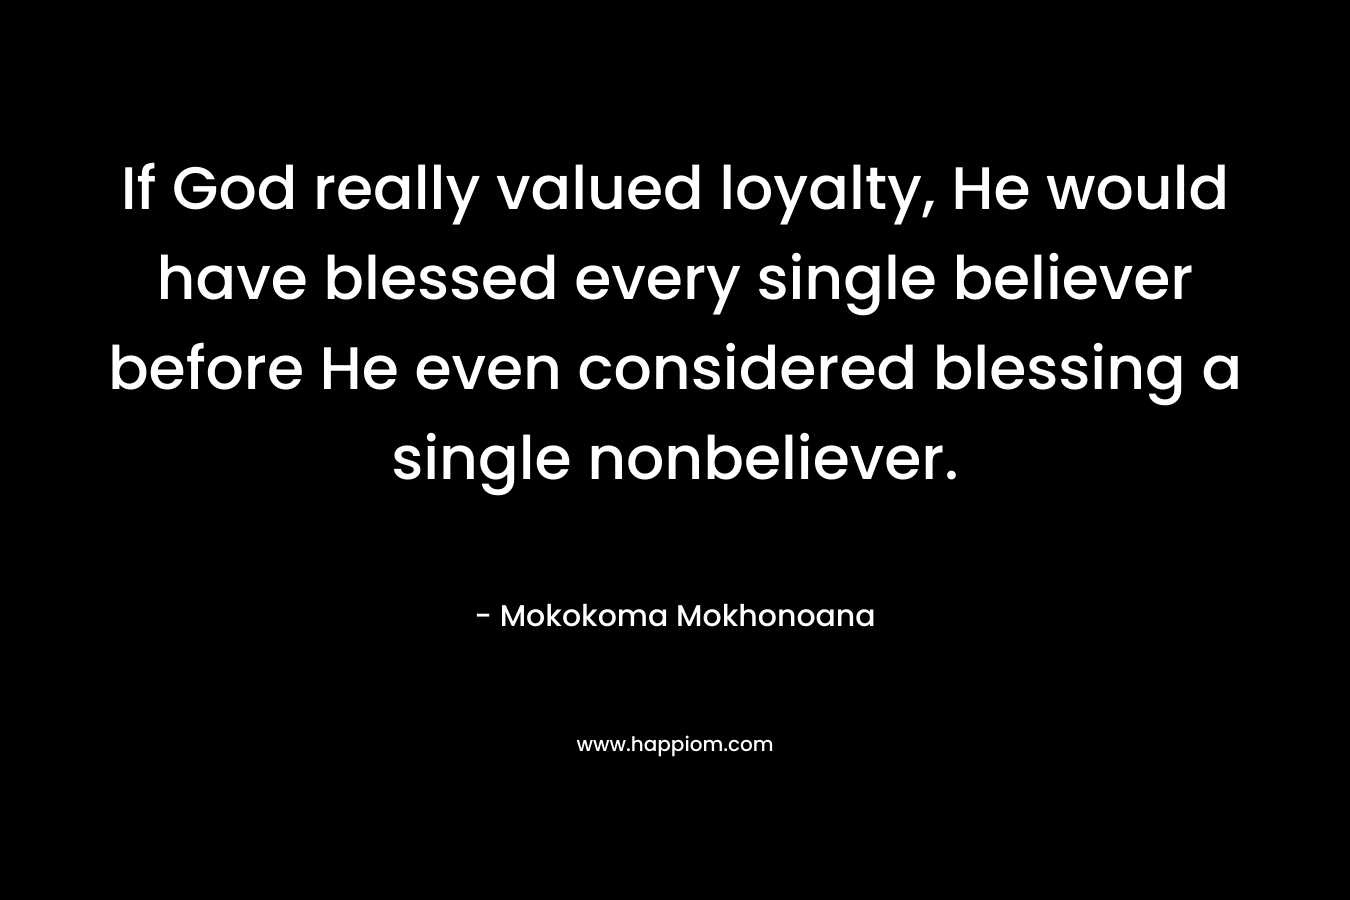 If God really valued loyalty, He would have blessed every single believer before He even considered blessing a single nonbeliever.